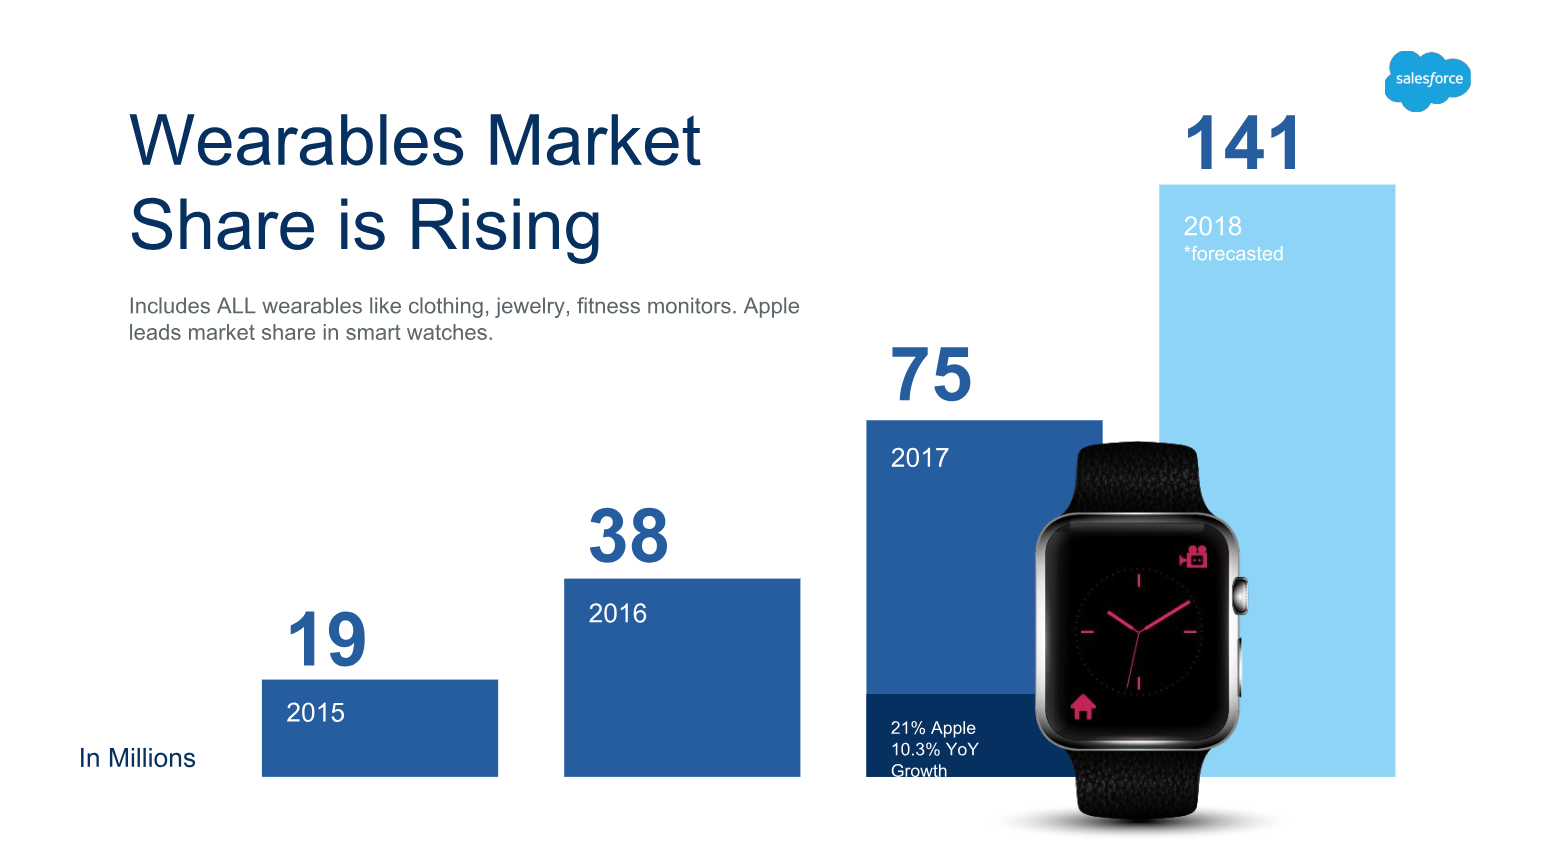 Wearables market share is rising.